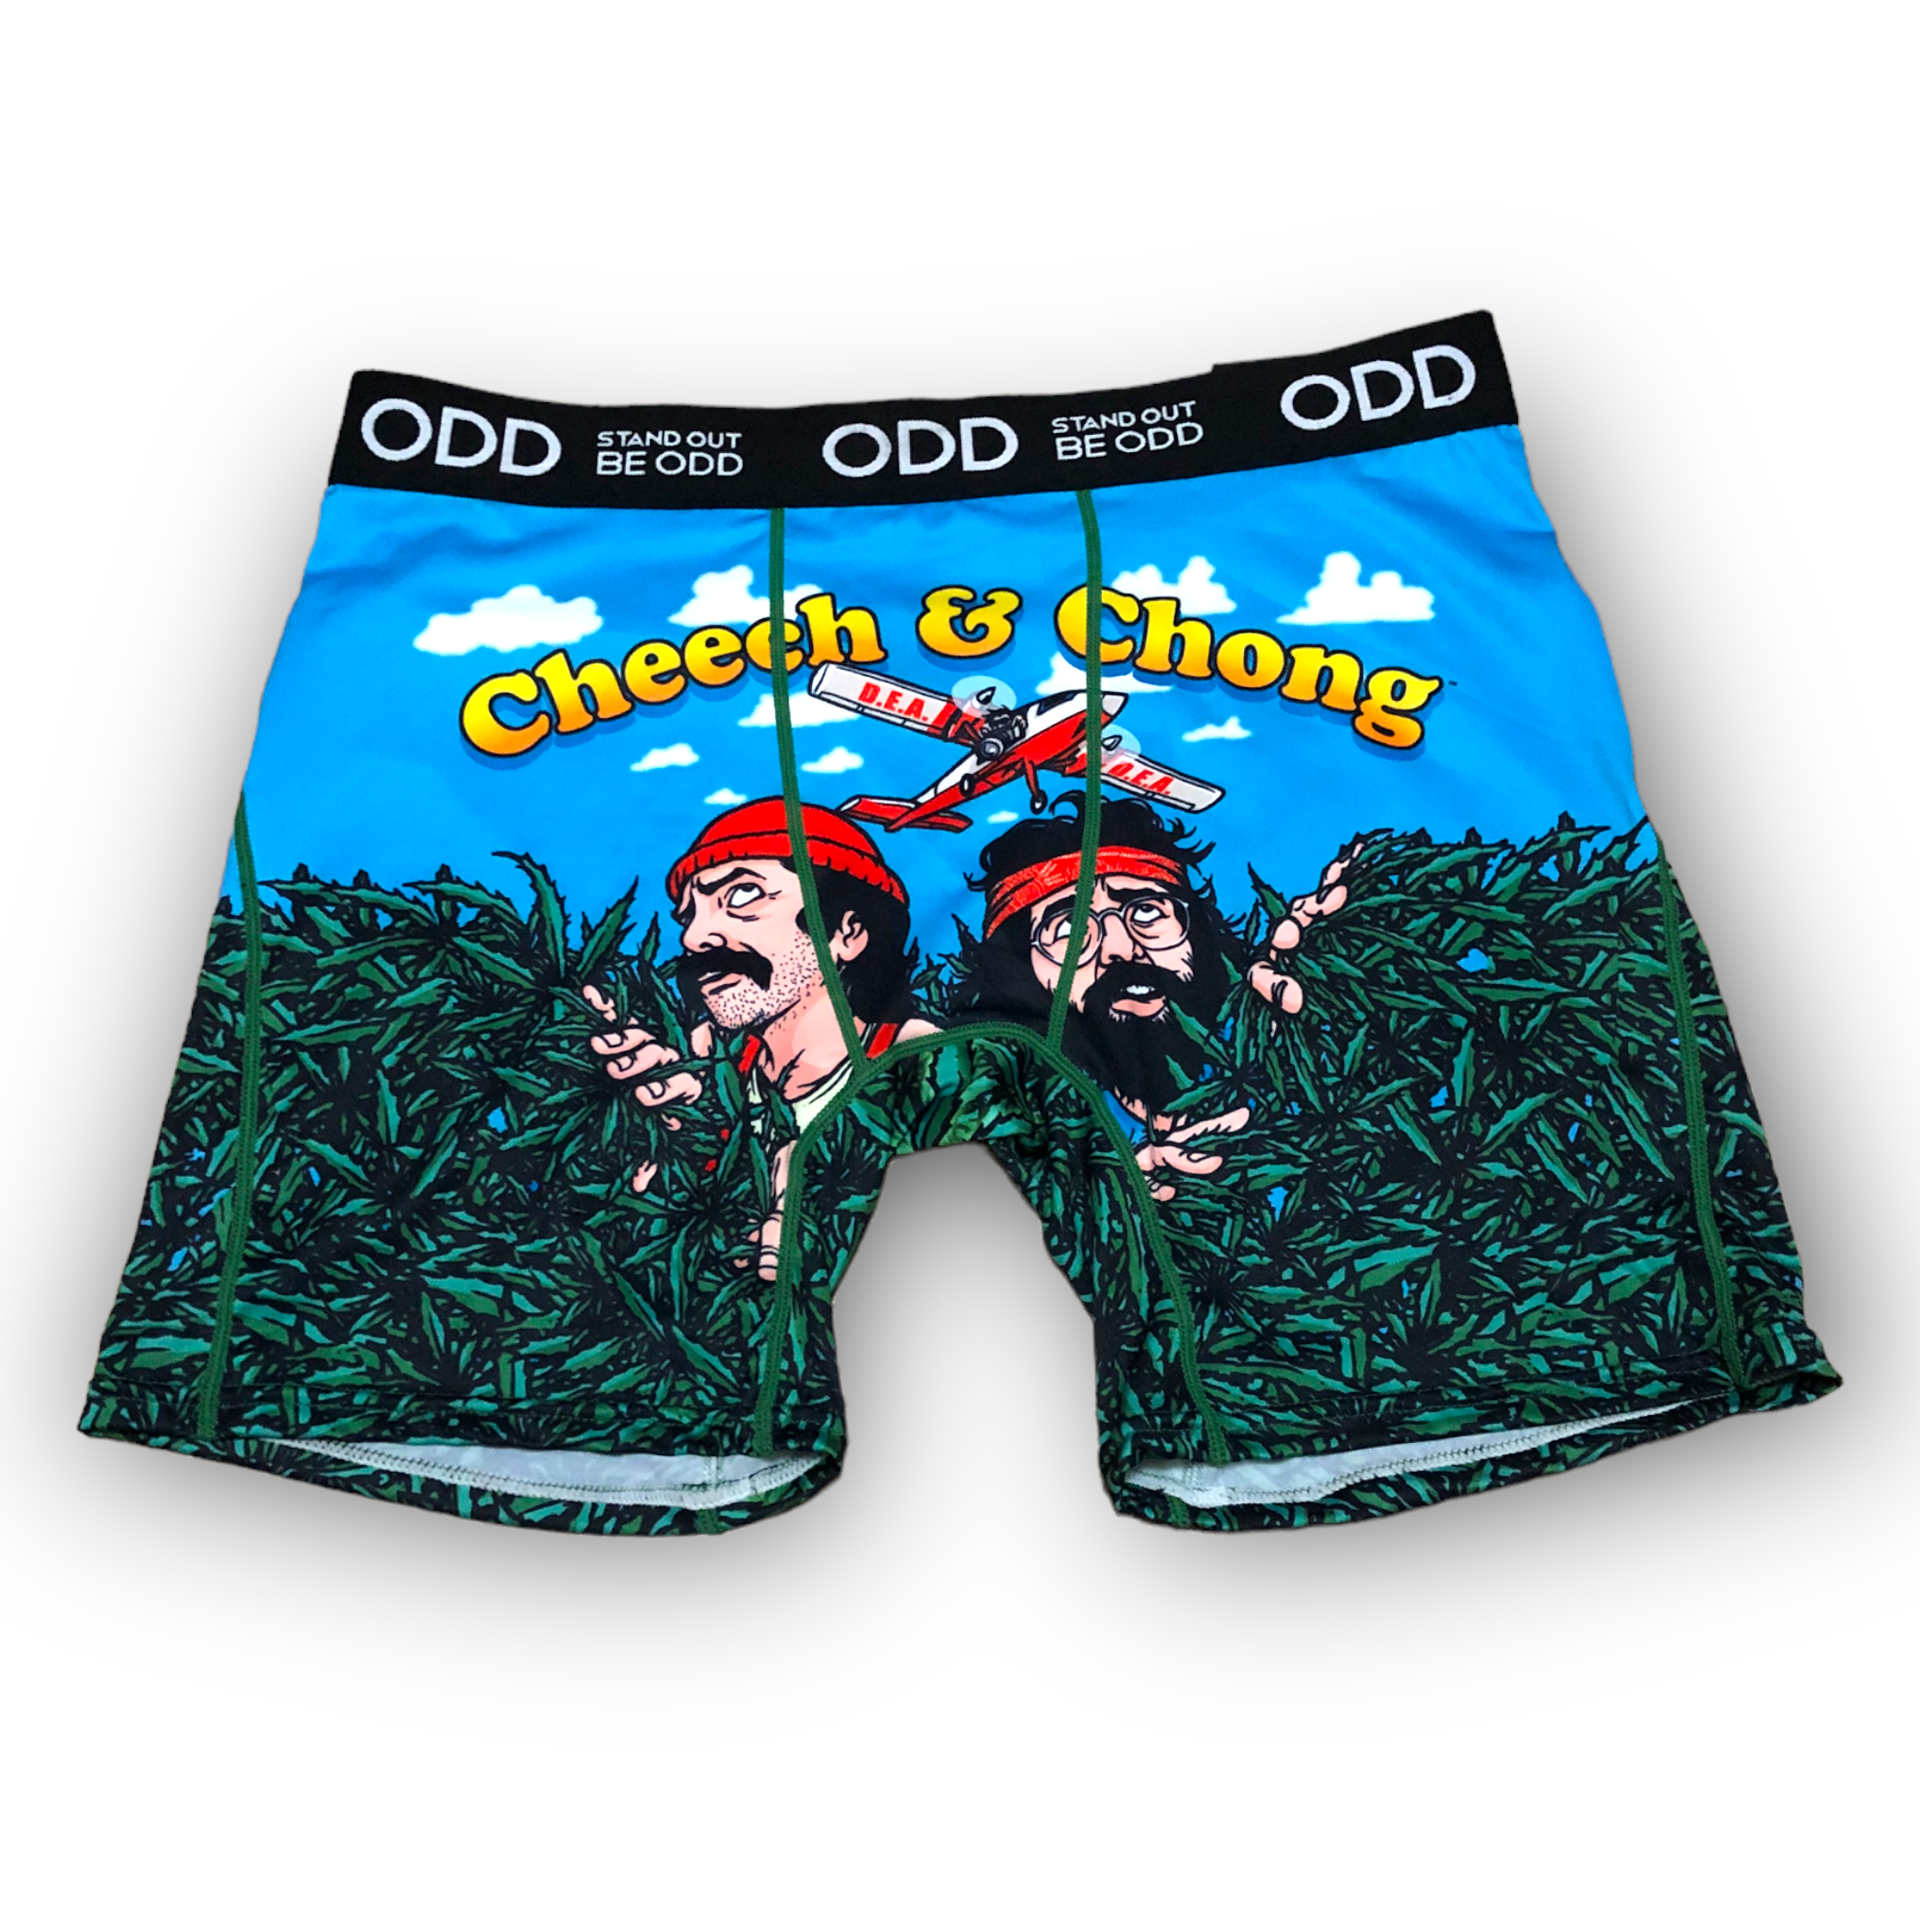 Cheech & Chong Mens Size L Boxer Briefs ODD Stand Out Be Odd Underwear NEW.  MS1